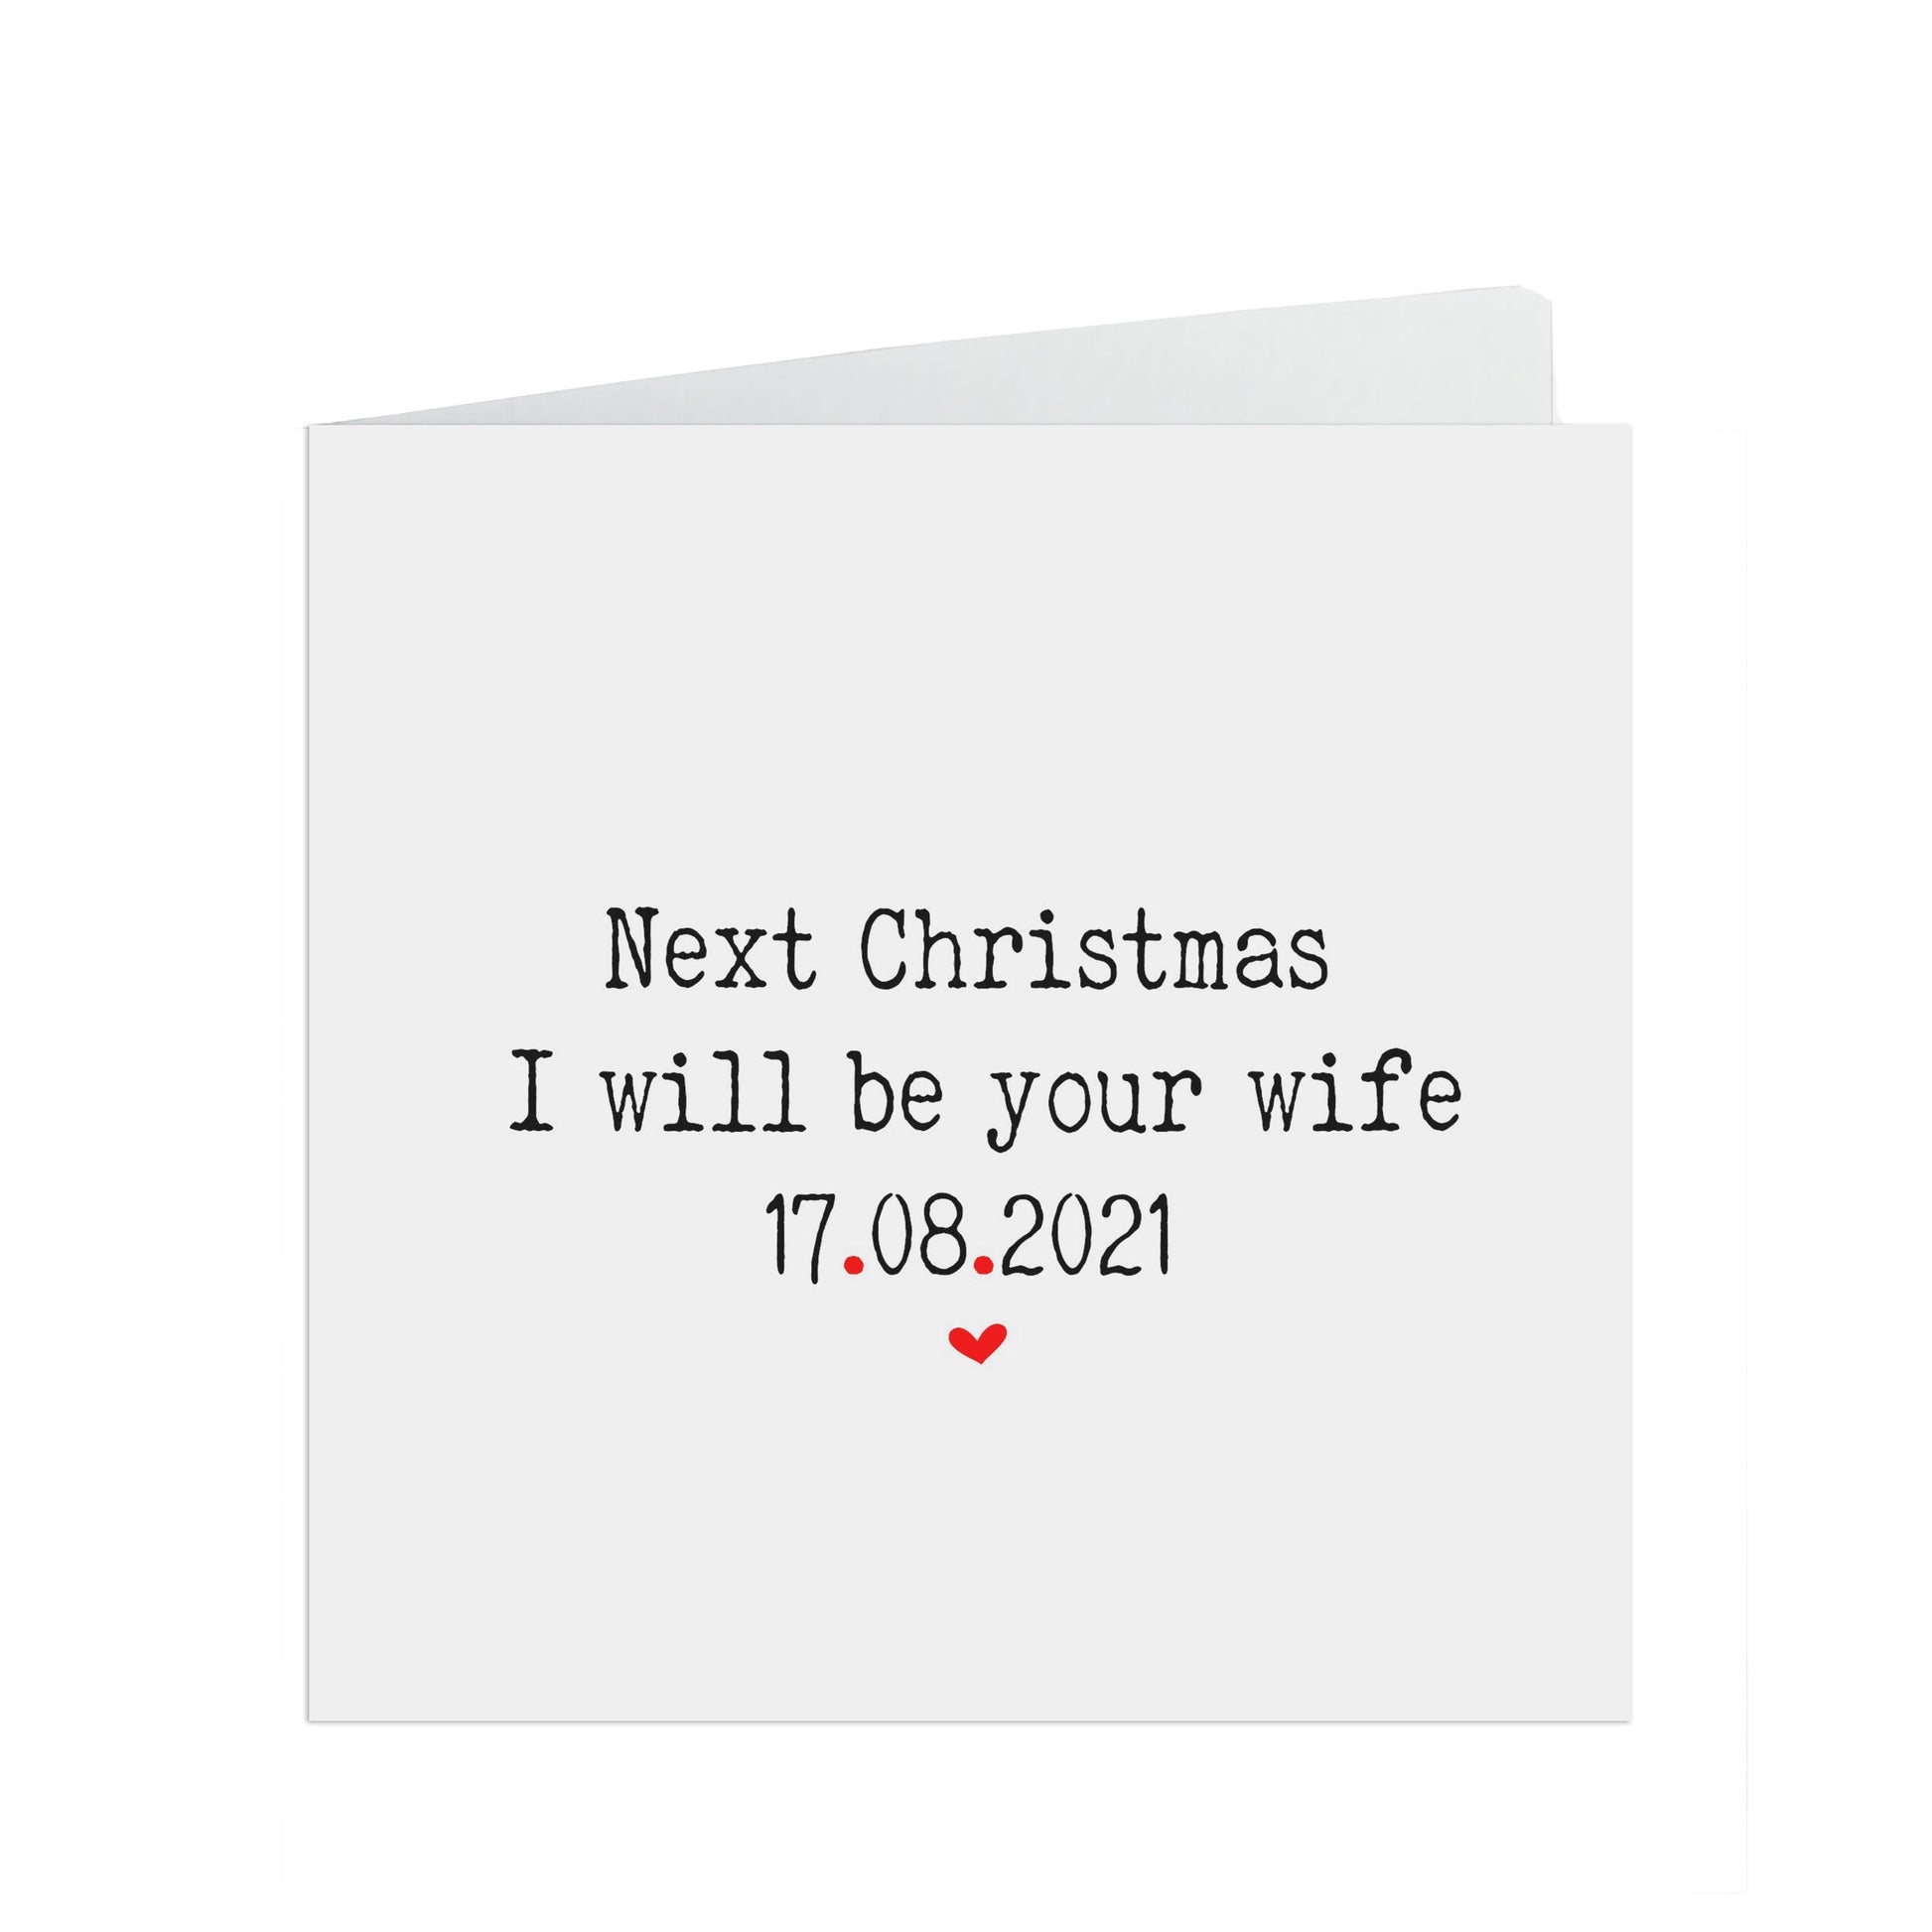 Next Christmas I Will Be Your Wife, Card Personalised With Wedding Date